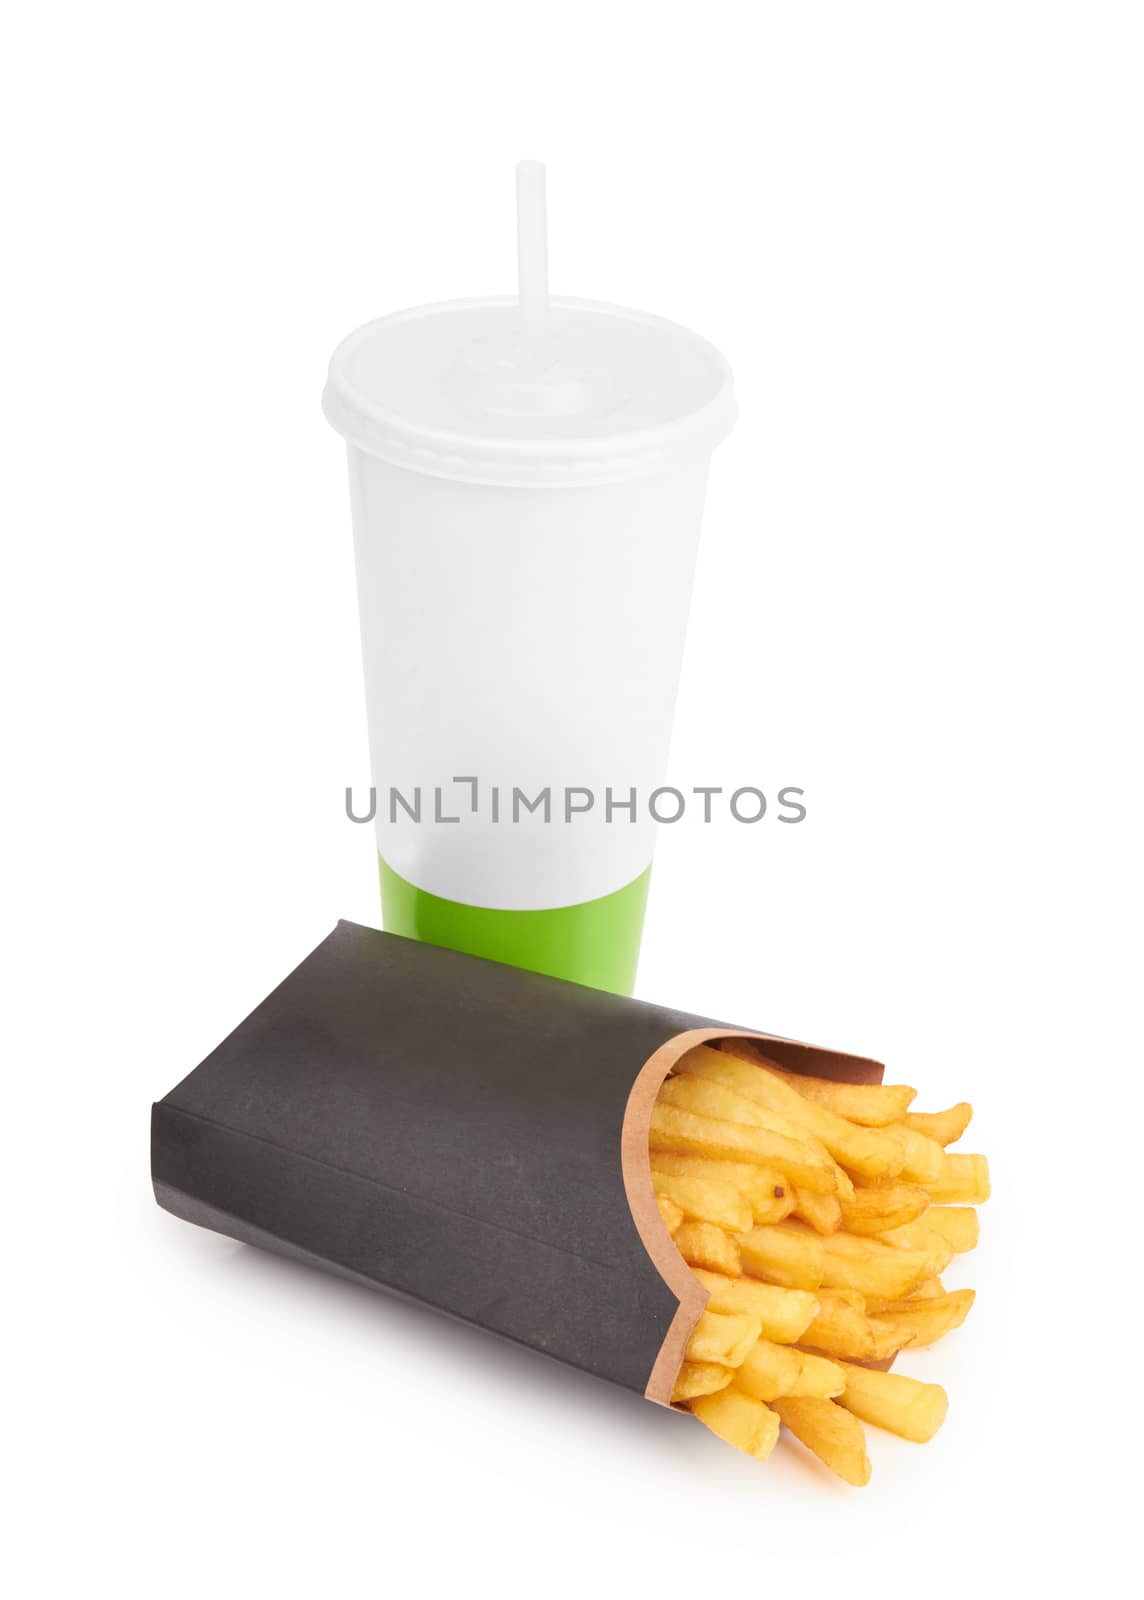 French fries in a black carton box isolated on white